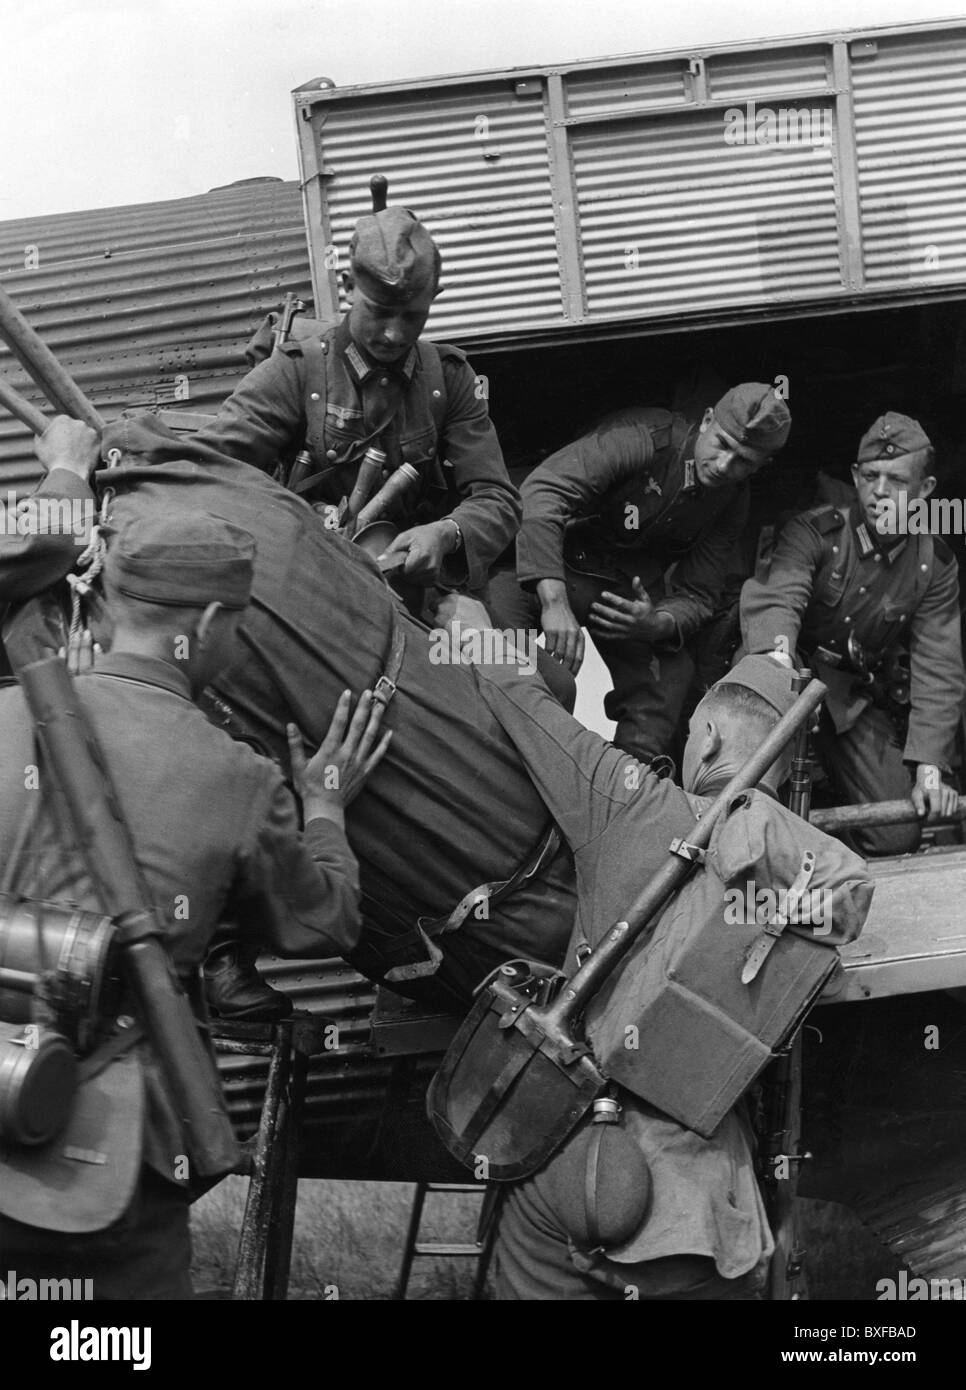 Nazism / National Socialism, military, Wehrmacht, army, soldiers loading equipment into a transport plane Junkers Ju 52, circa 1940, Germany, Third Reich, Second World War, WWII, uniform, uniforms, 20th century, historic, historical, spade, spades, aircraft, air transportation, 1930s, 1940s, people, Additional-Rights-Clearences-Not Available Stock Photo